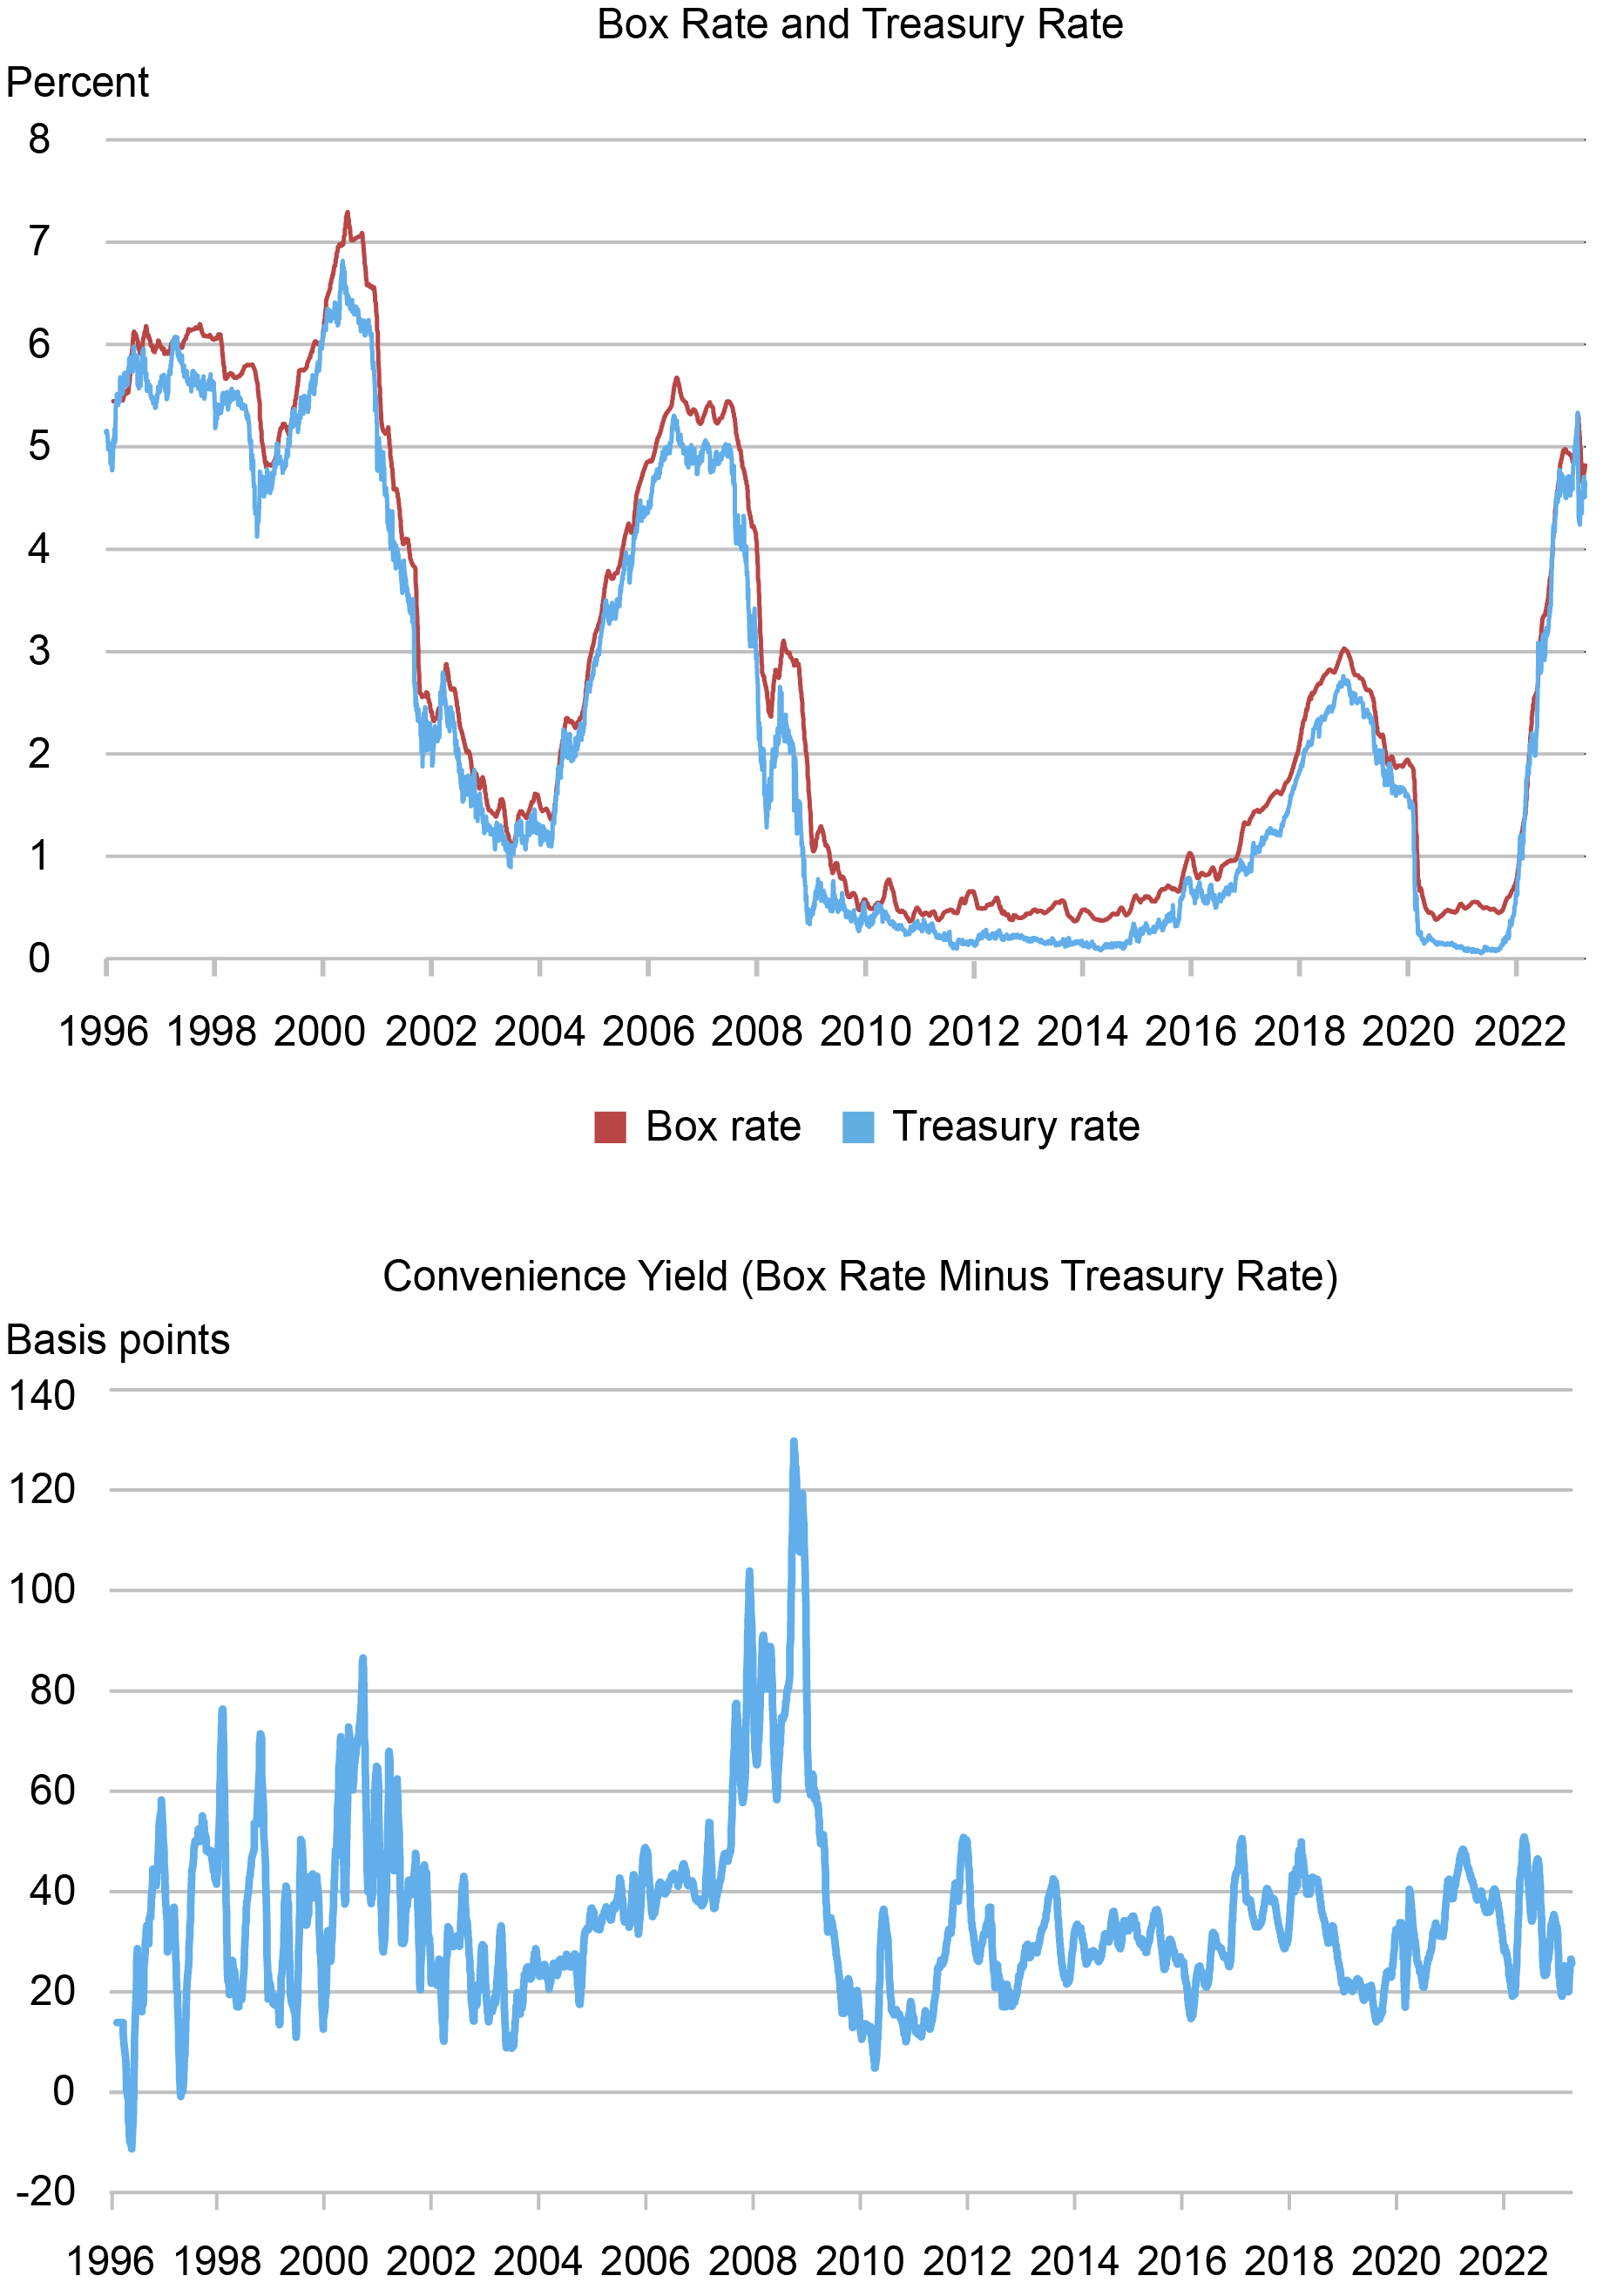 Liberty Street Economics line chart plots the one-year box rate, Treasury rate, and convenience yield estimate from January 1996 through April 2023 as a twenty-one-day moving average across trading days. The top panel plots the time-series of the one-year box rate and Treasury rate (in percentage terms), while the bottom panel plots the convenience yield (in basis points).